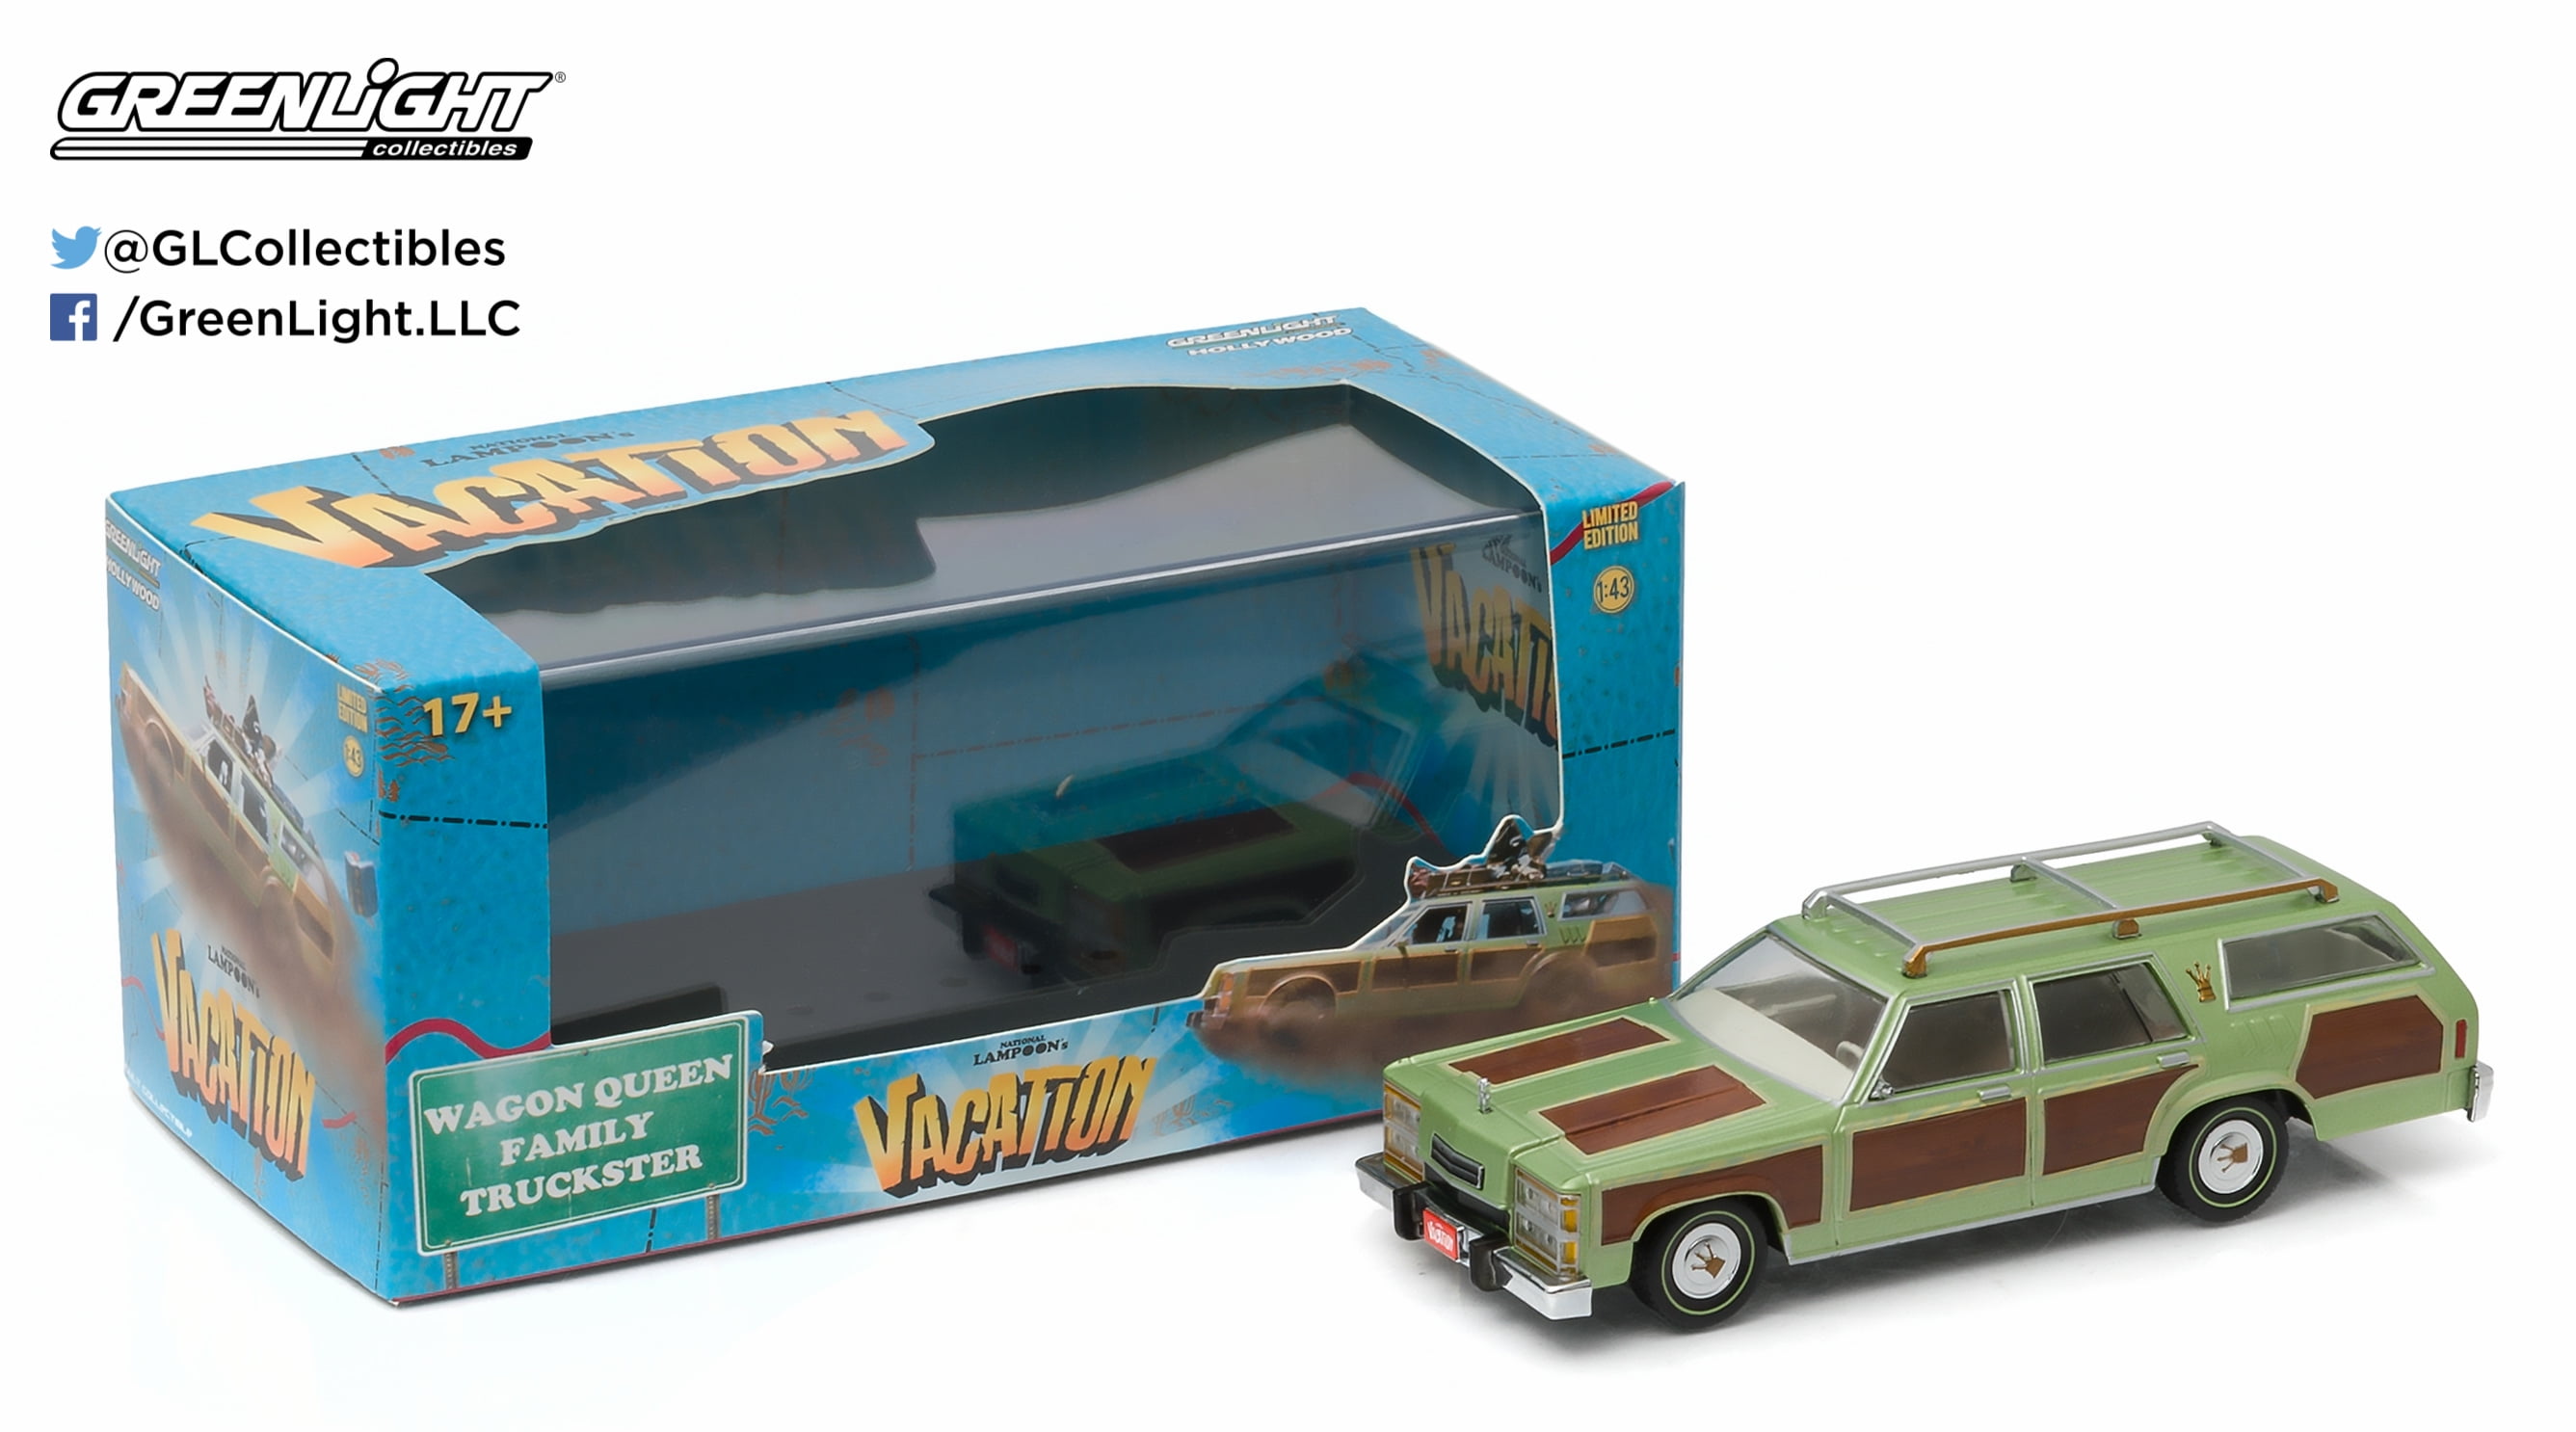 Details about  / GREEN MACHINE SET WAGON QUEEN FAMILY TRUCKSTER  VACATION Greenlight Hollywood 12